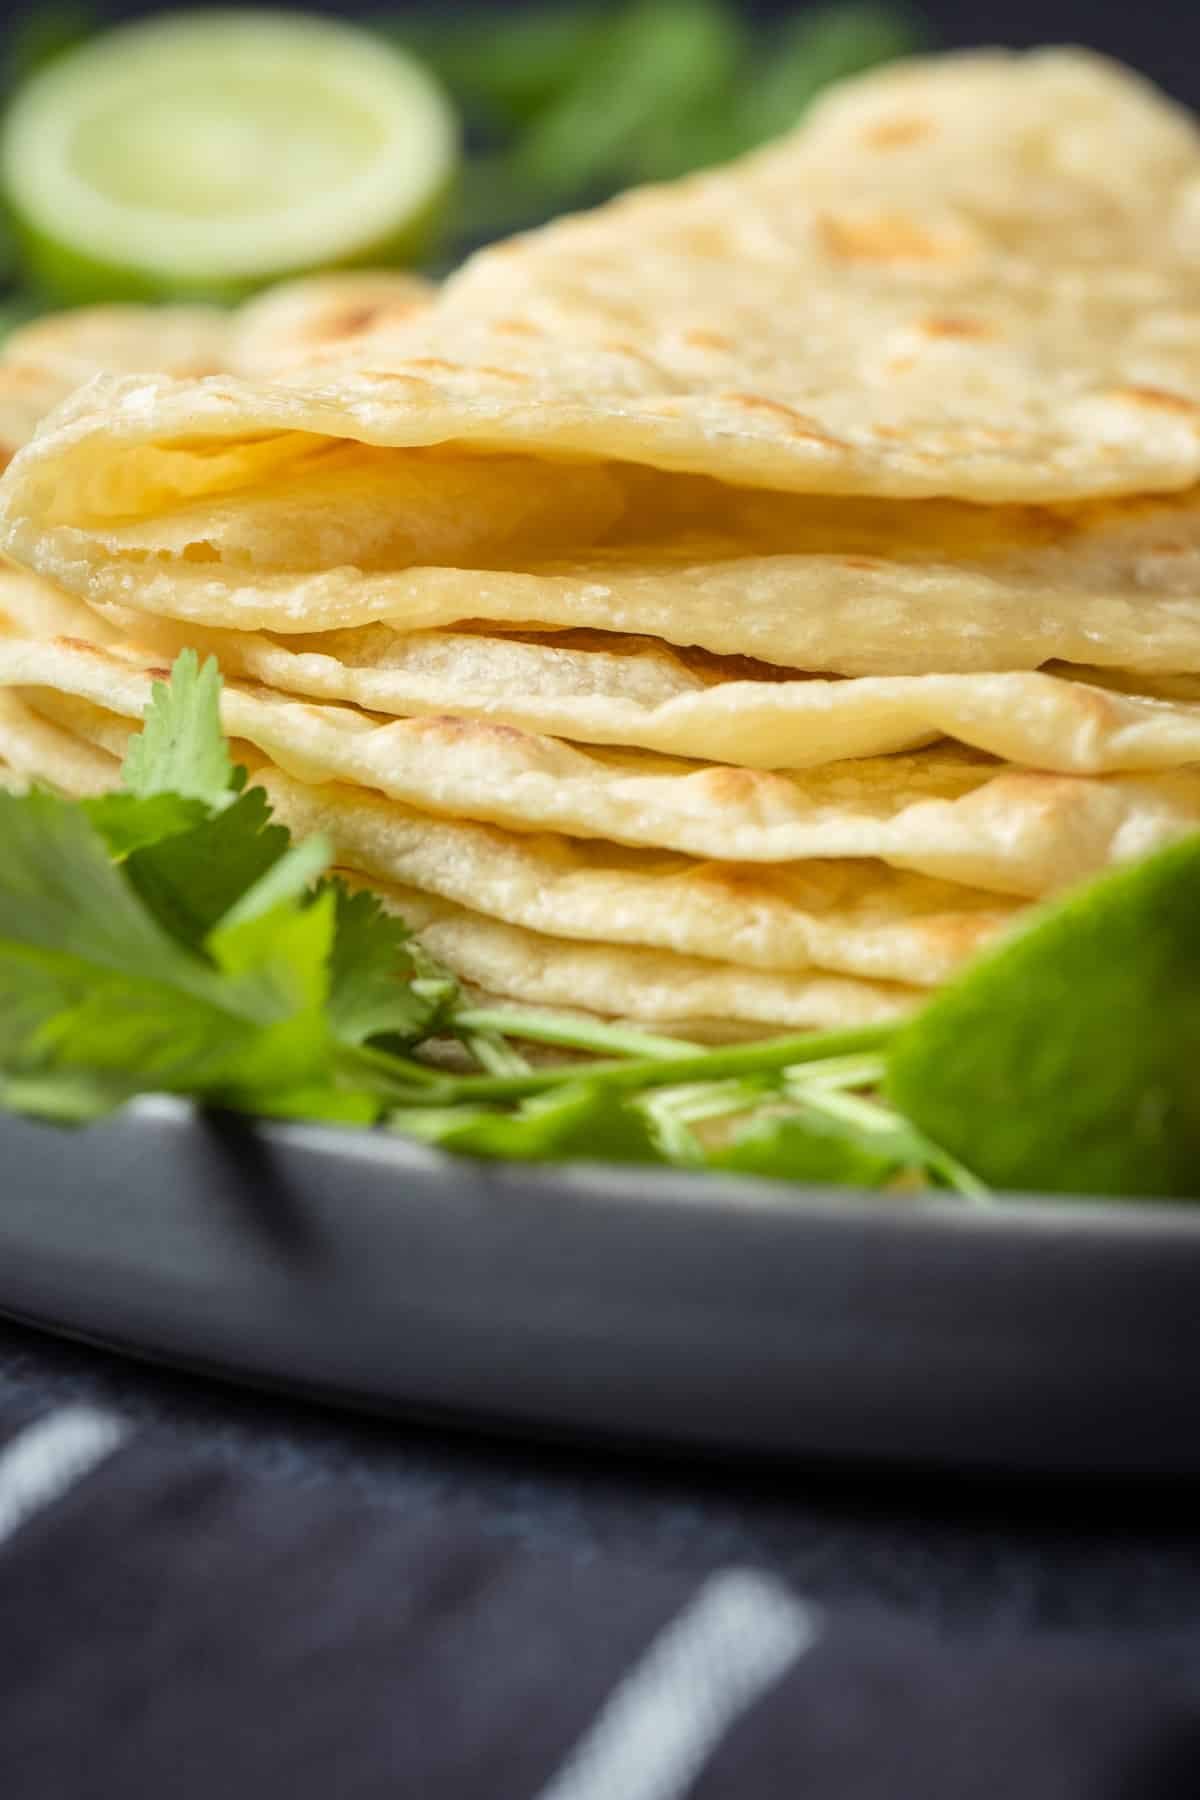 Stack of vegan tortillas on a plate with fresh cilantro.